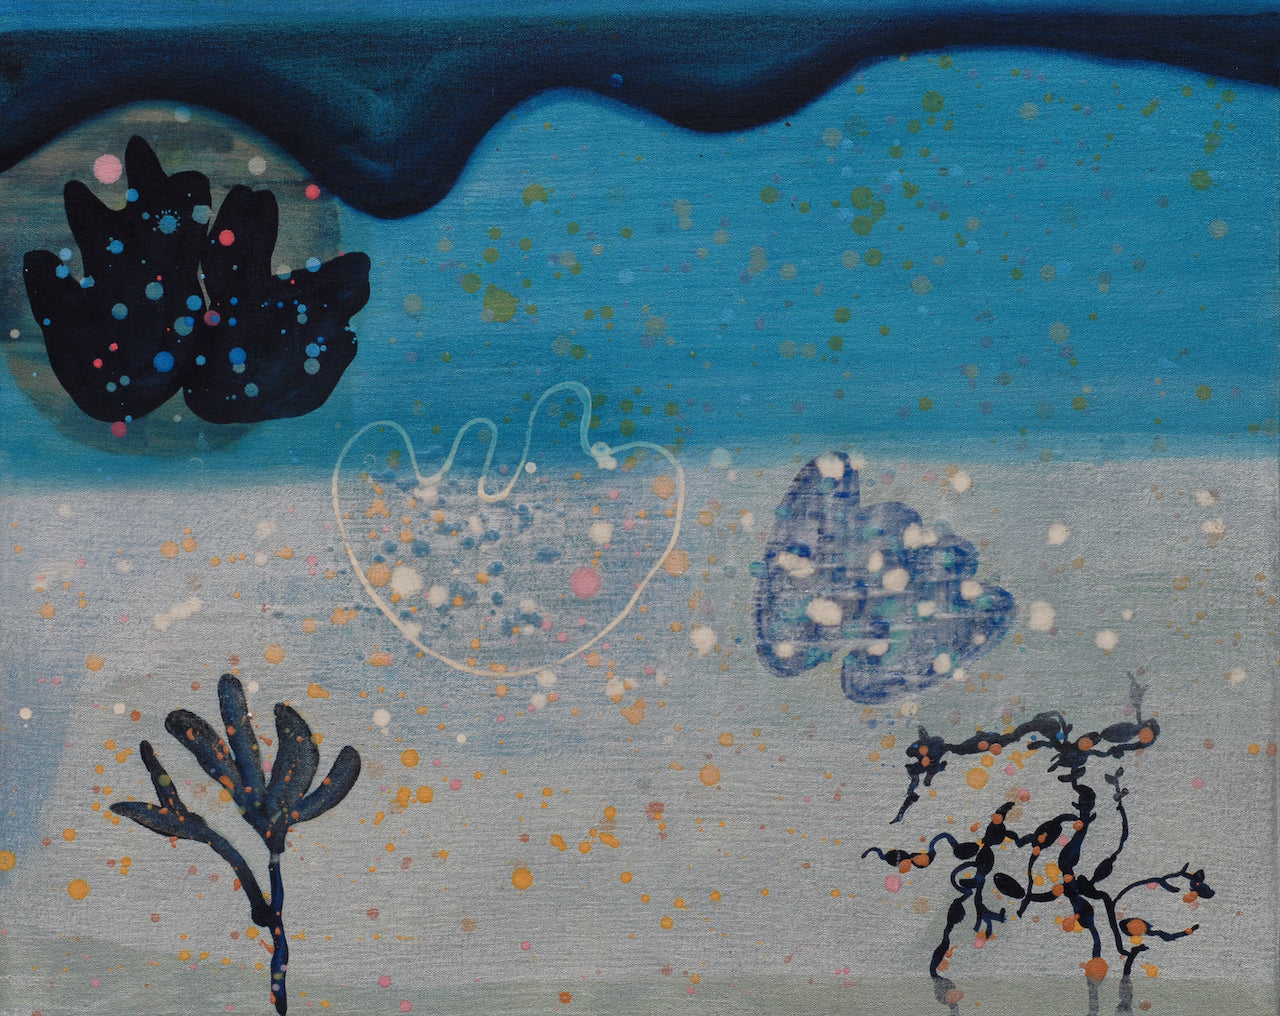 Tones of blues and greys with sea weed shapes by artist Ella Carty